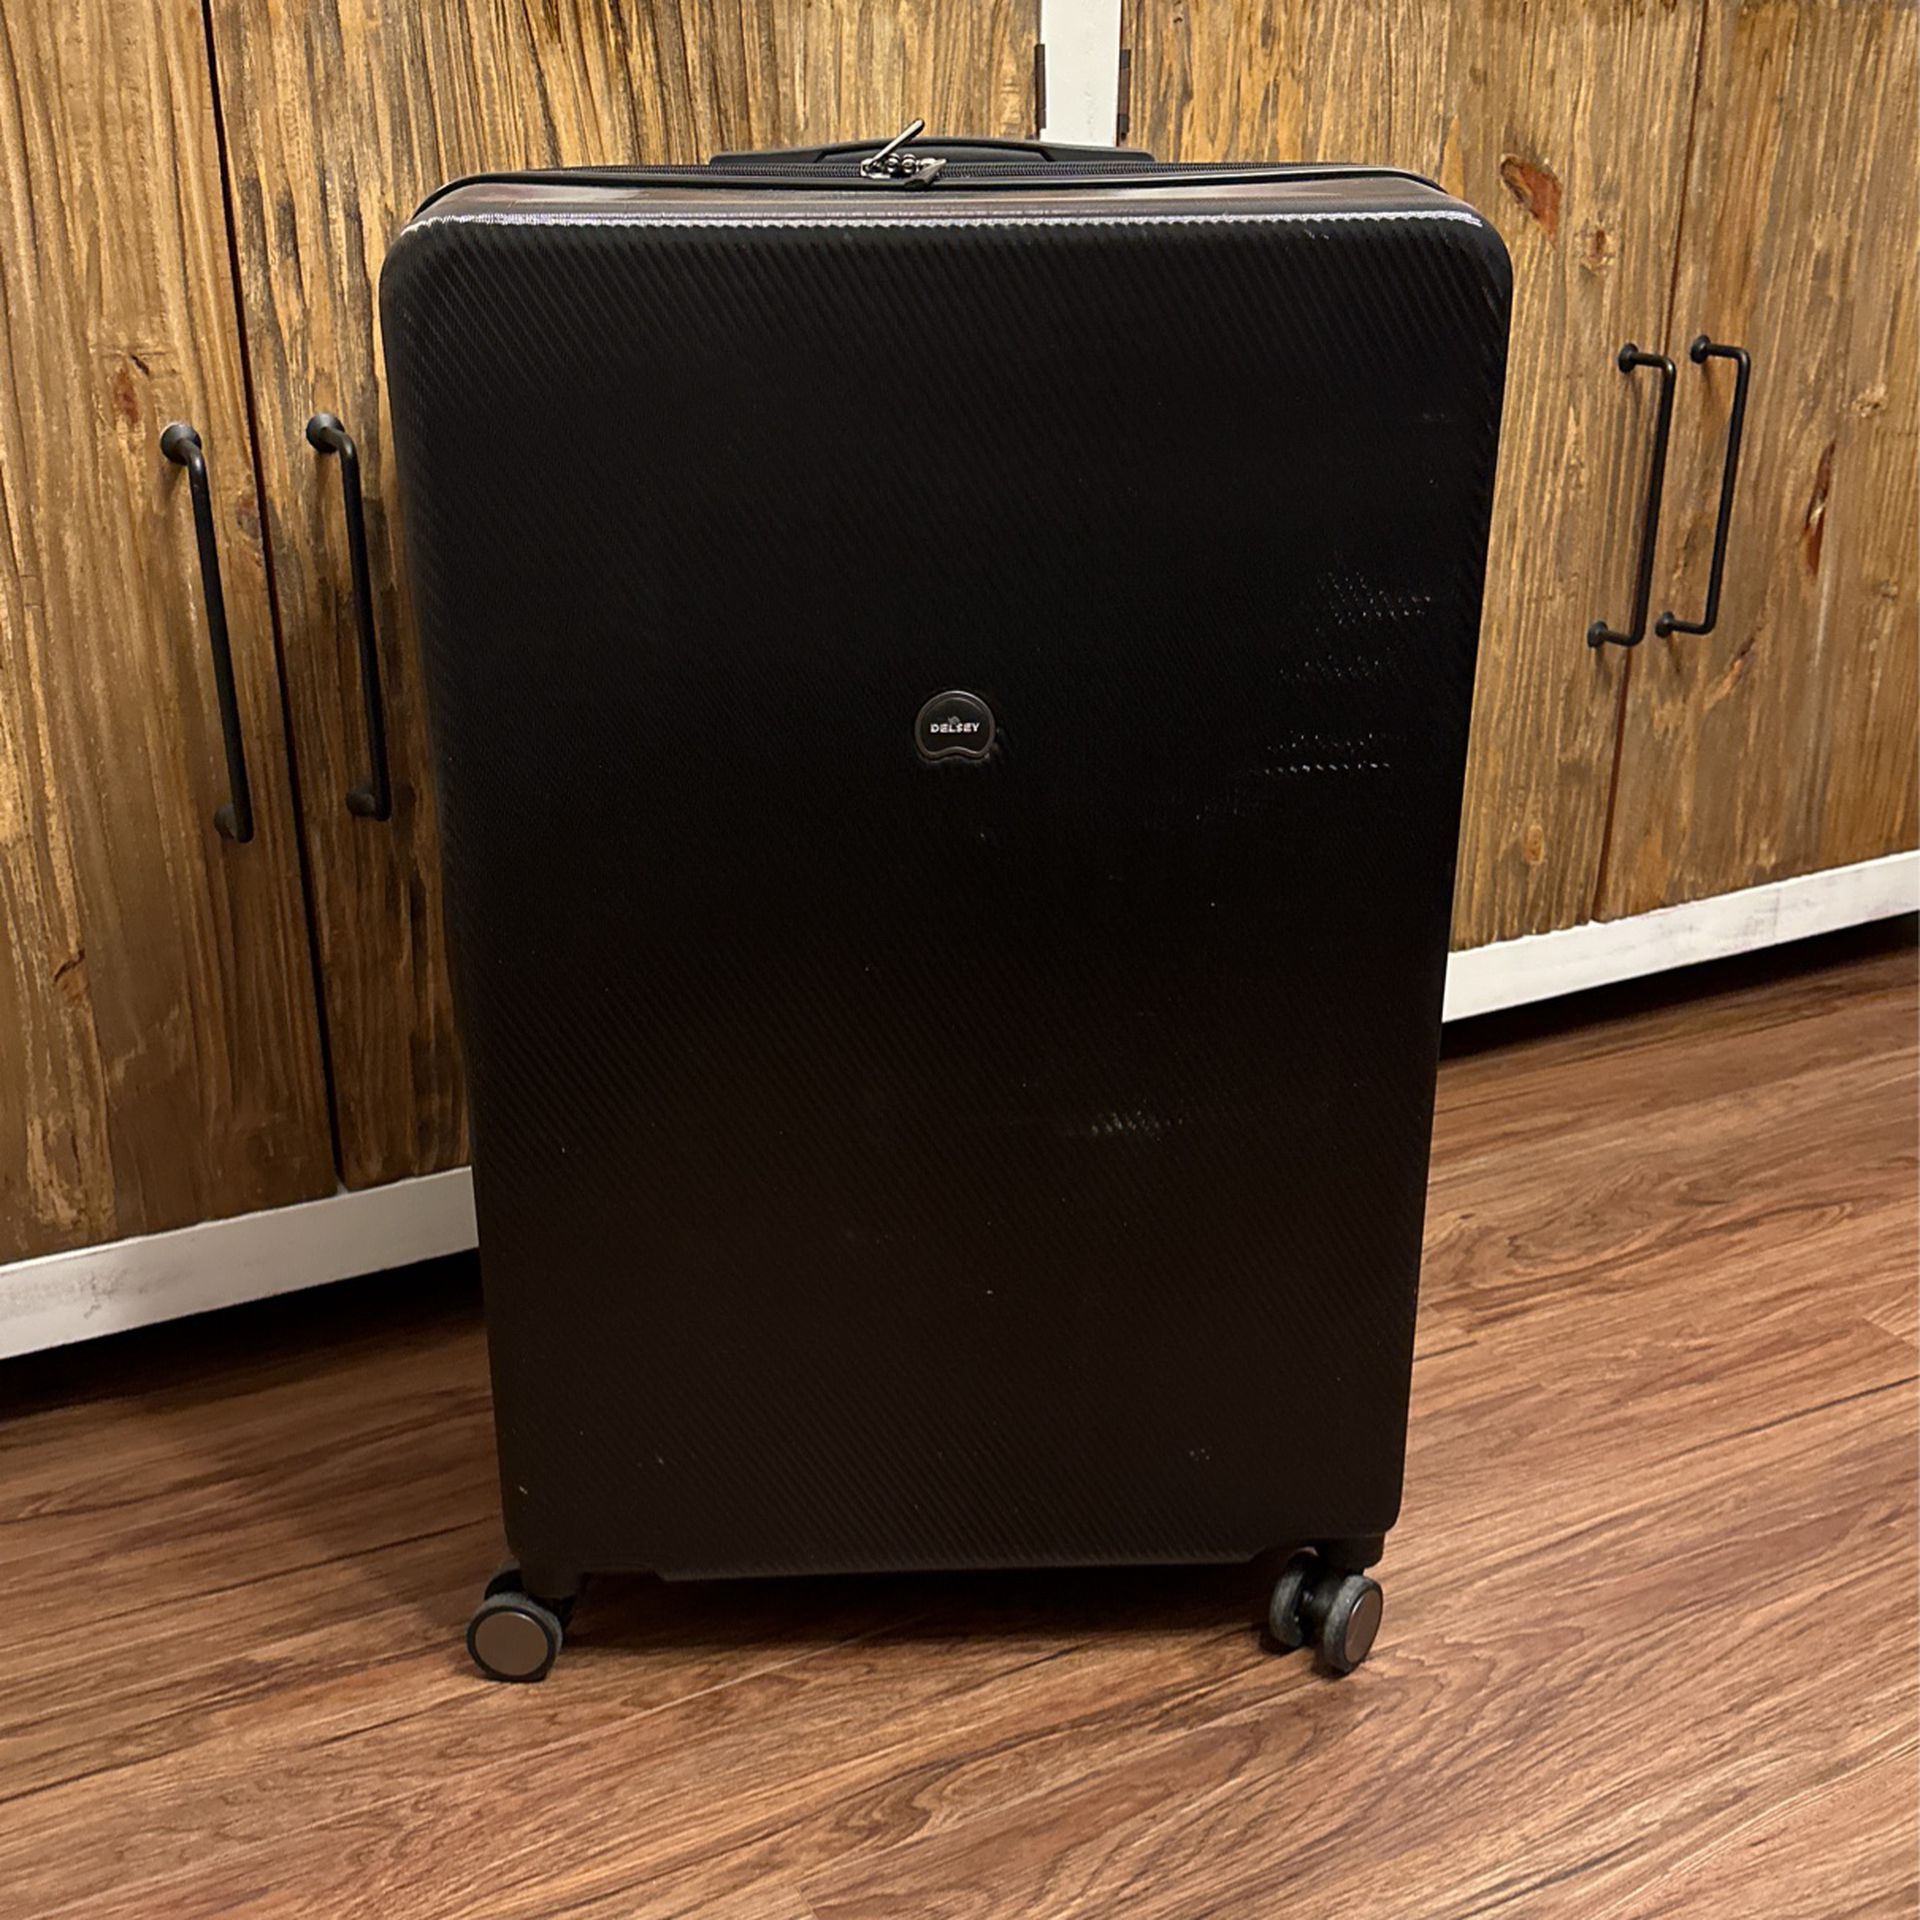 MAKE OFFER MUST SELL Delsey Paris Luggage Black